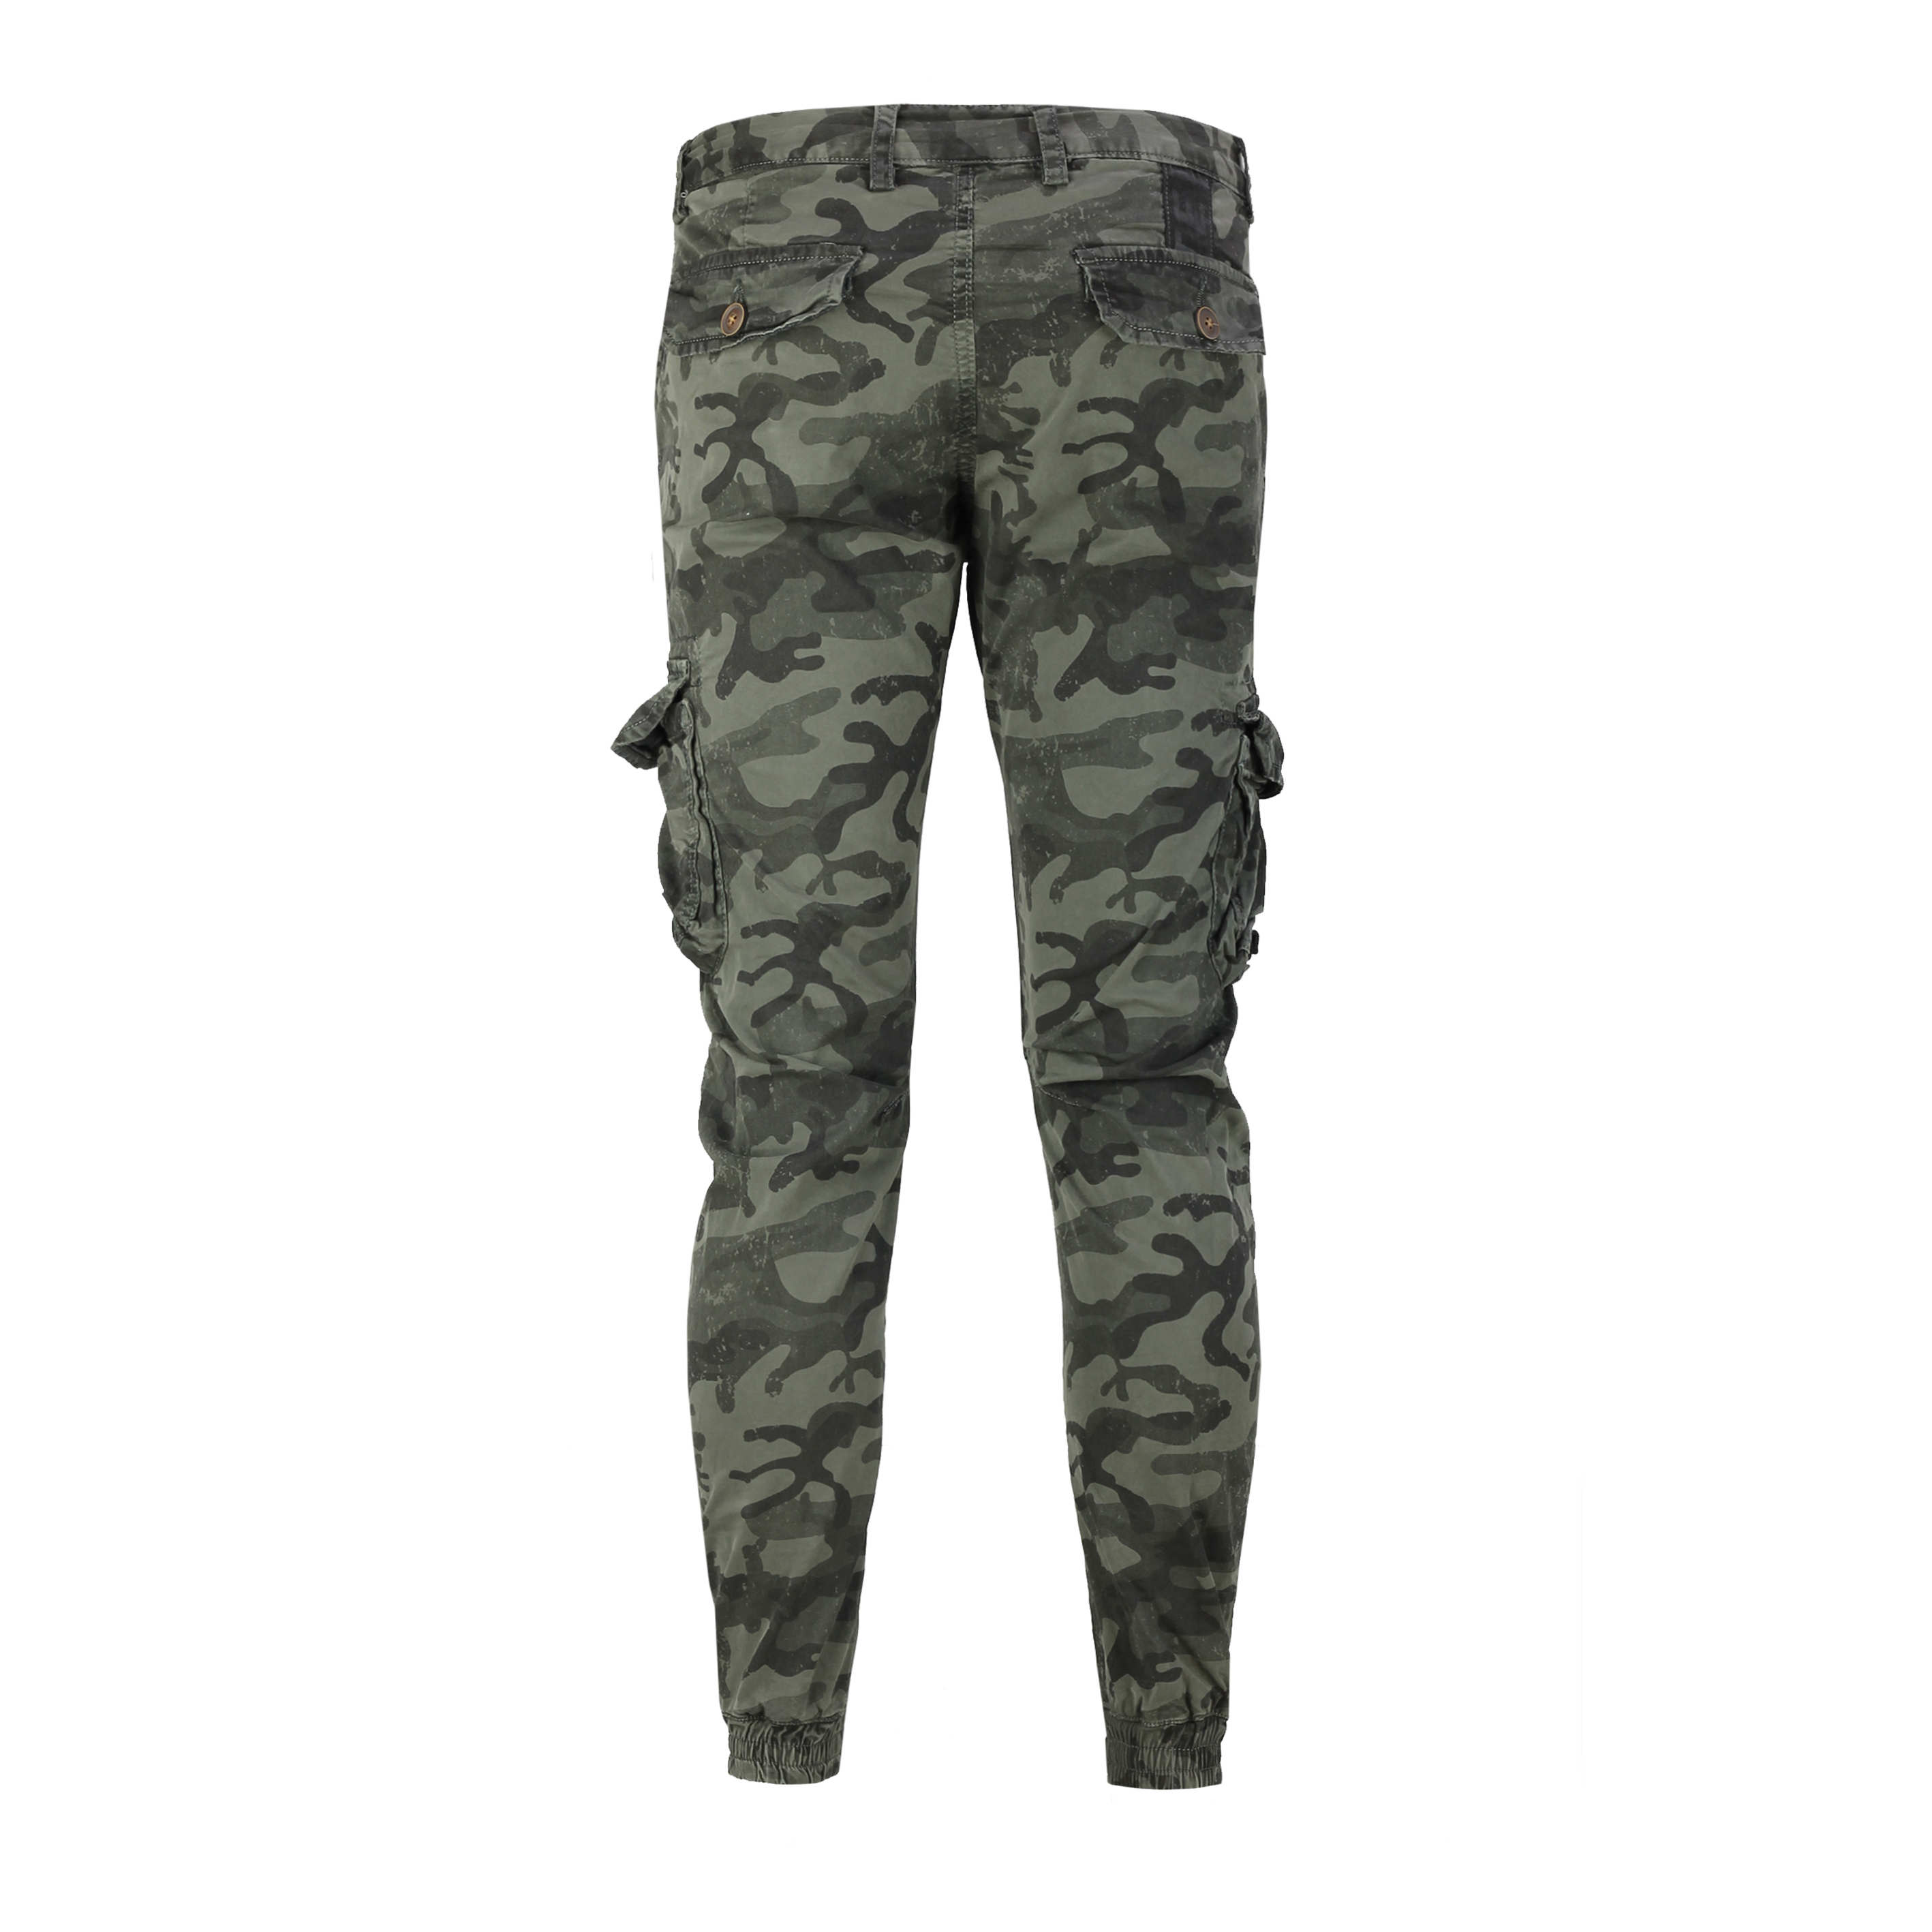 Men Military Combat Army Trousers Camouflage Cargo Pocket Camo Casual Work Pants 